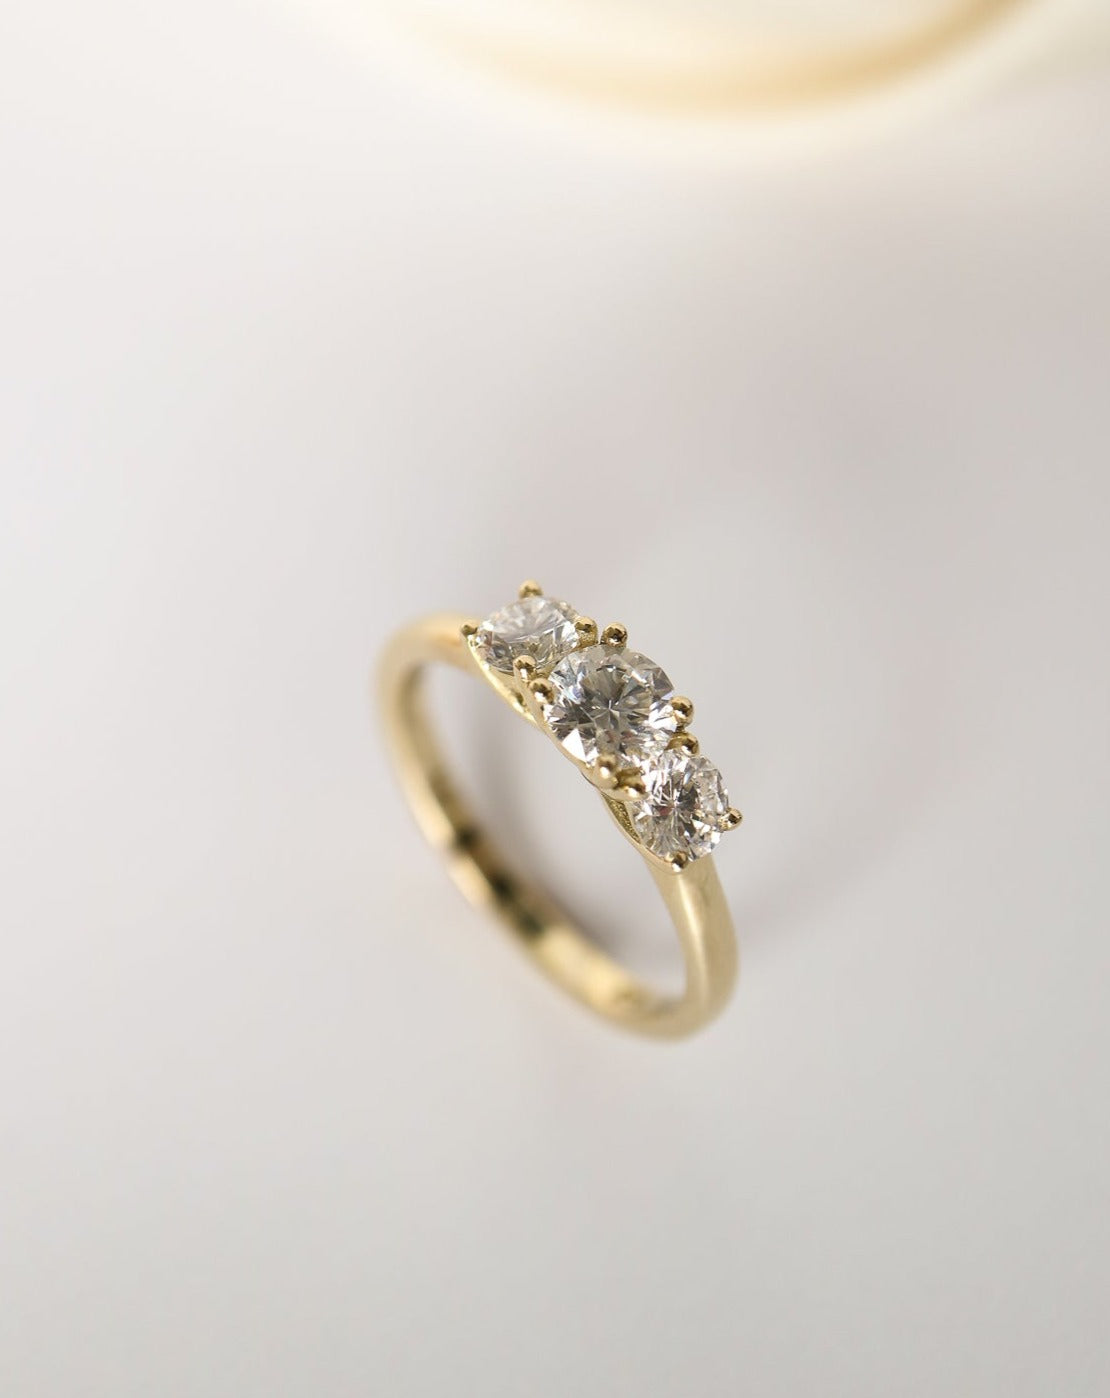 9kt gold lab grown diamond trilogy engagement ring from Collective & Co Jewellery South Africa